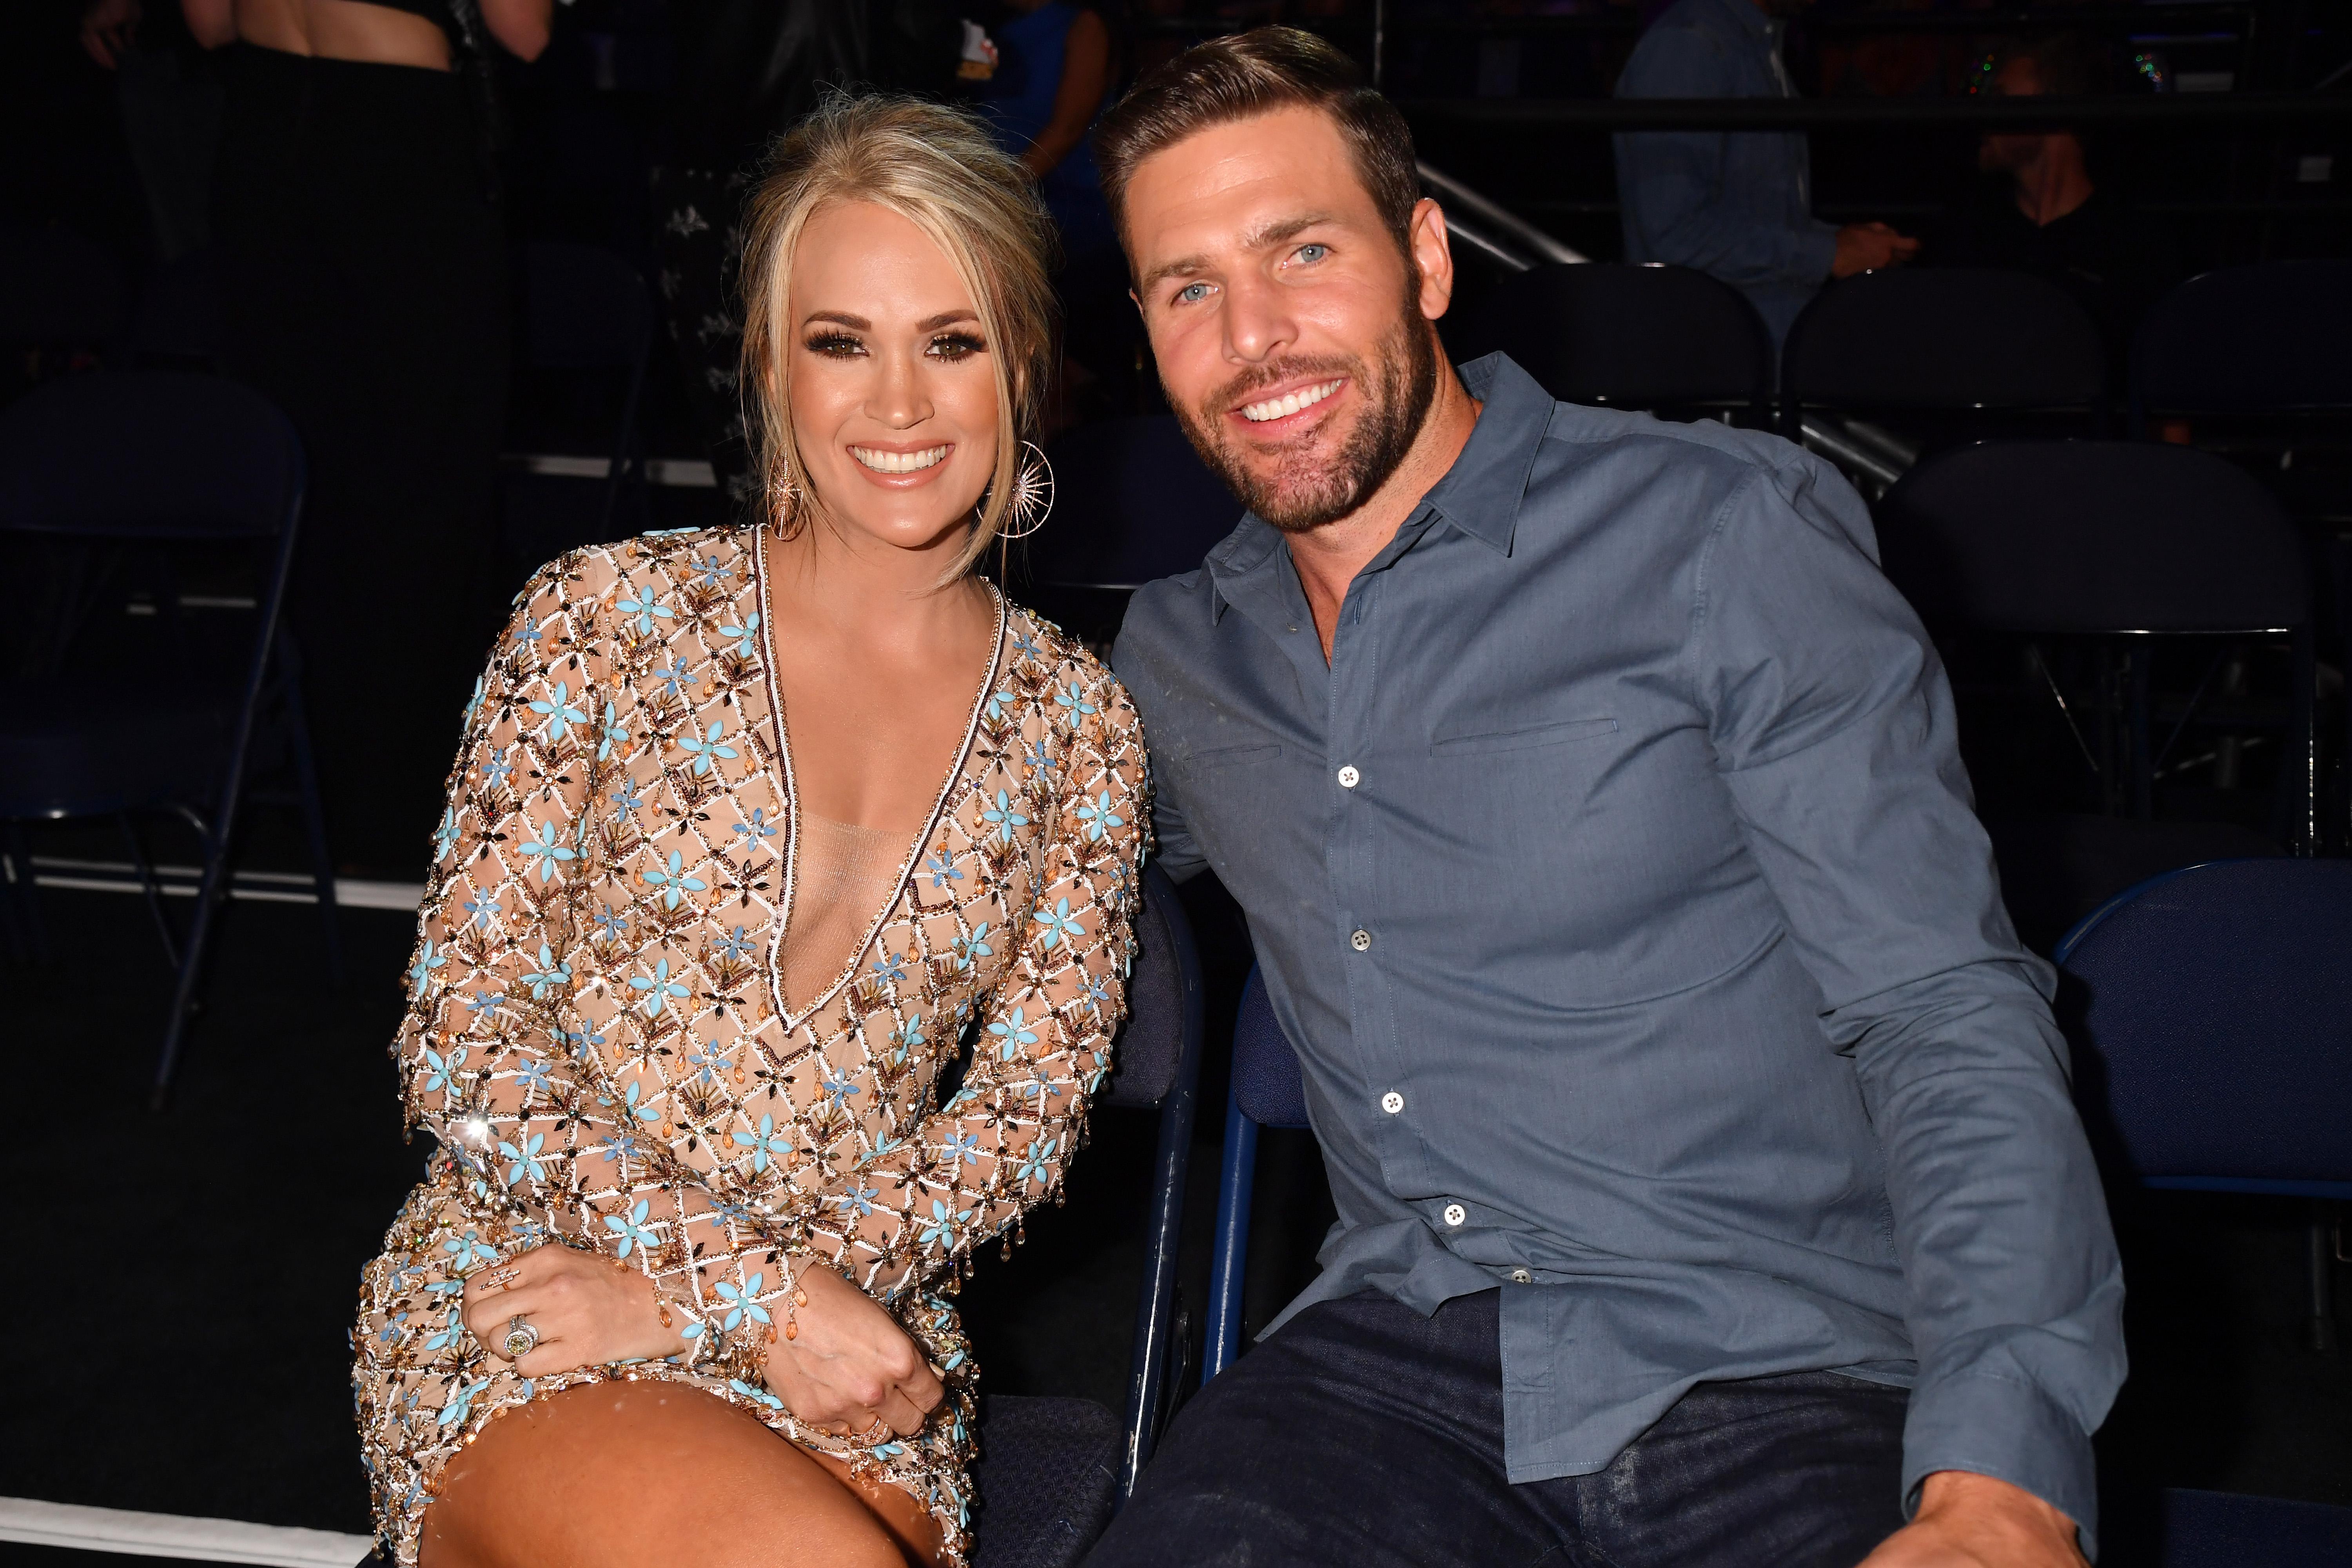 Carrie Underwood Shares How She and Her Husband, Mike Fisher, Work to Keep Children Humble